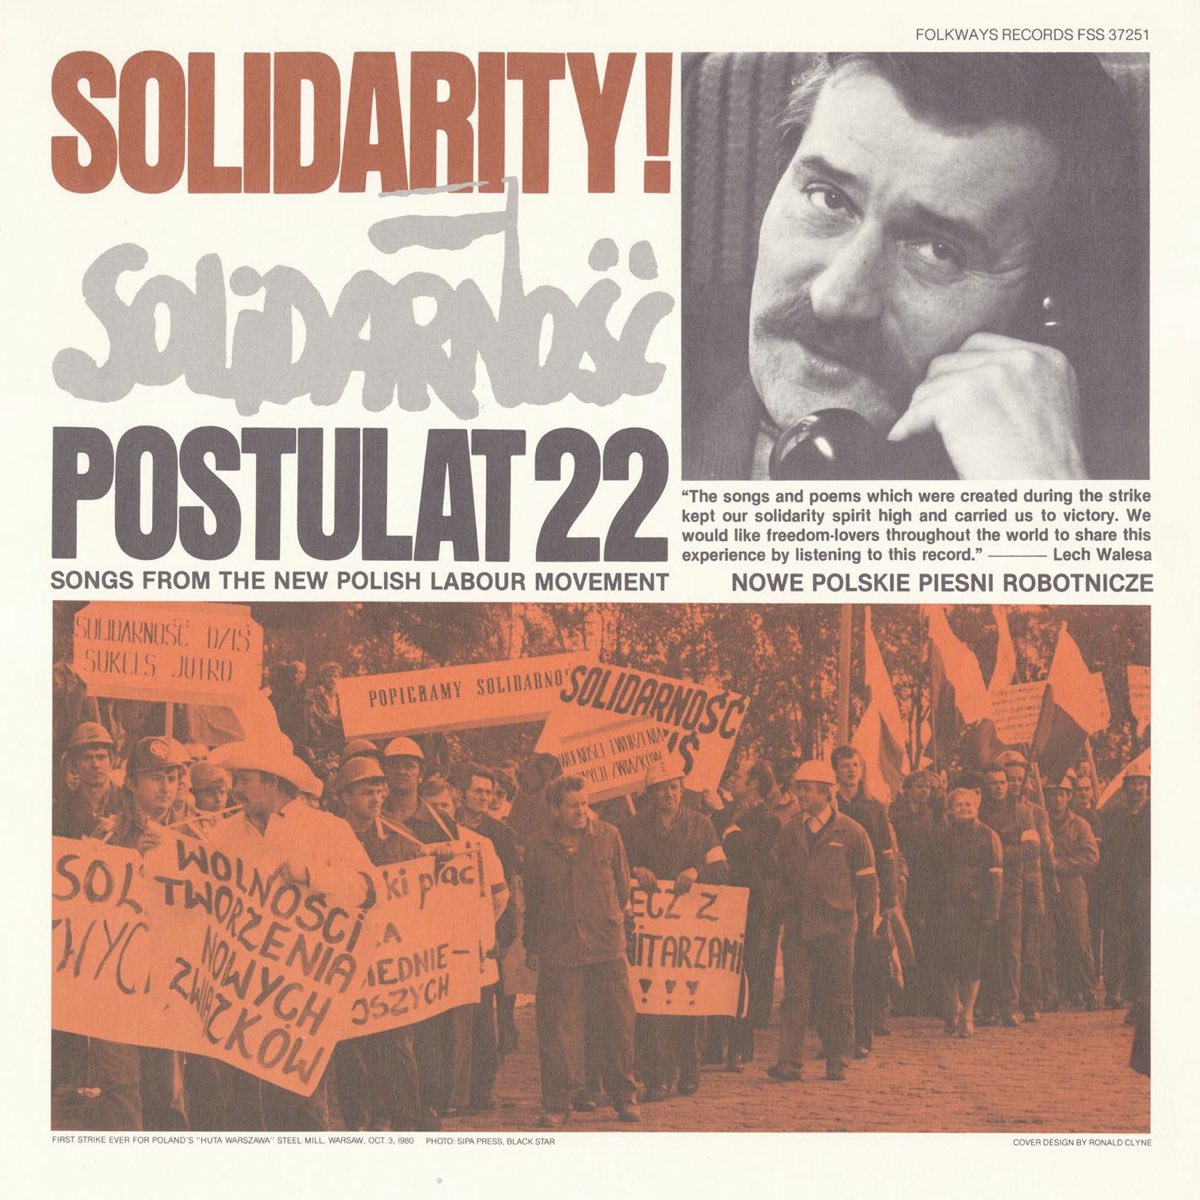 Solidarity! - Postulat 22: Songs from the New Polish Labour Movement (Nowe  Polskie Piesni Robotnicze)“ von Various Artists bei Apple Music